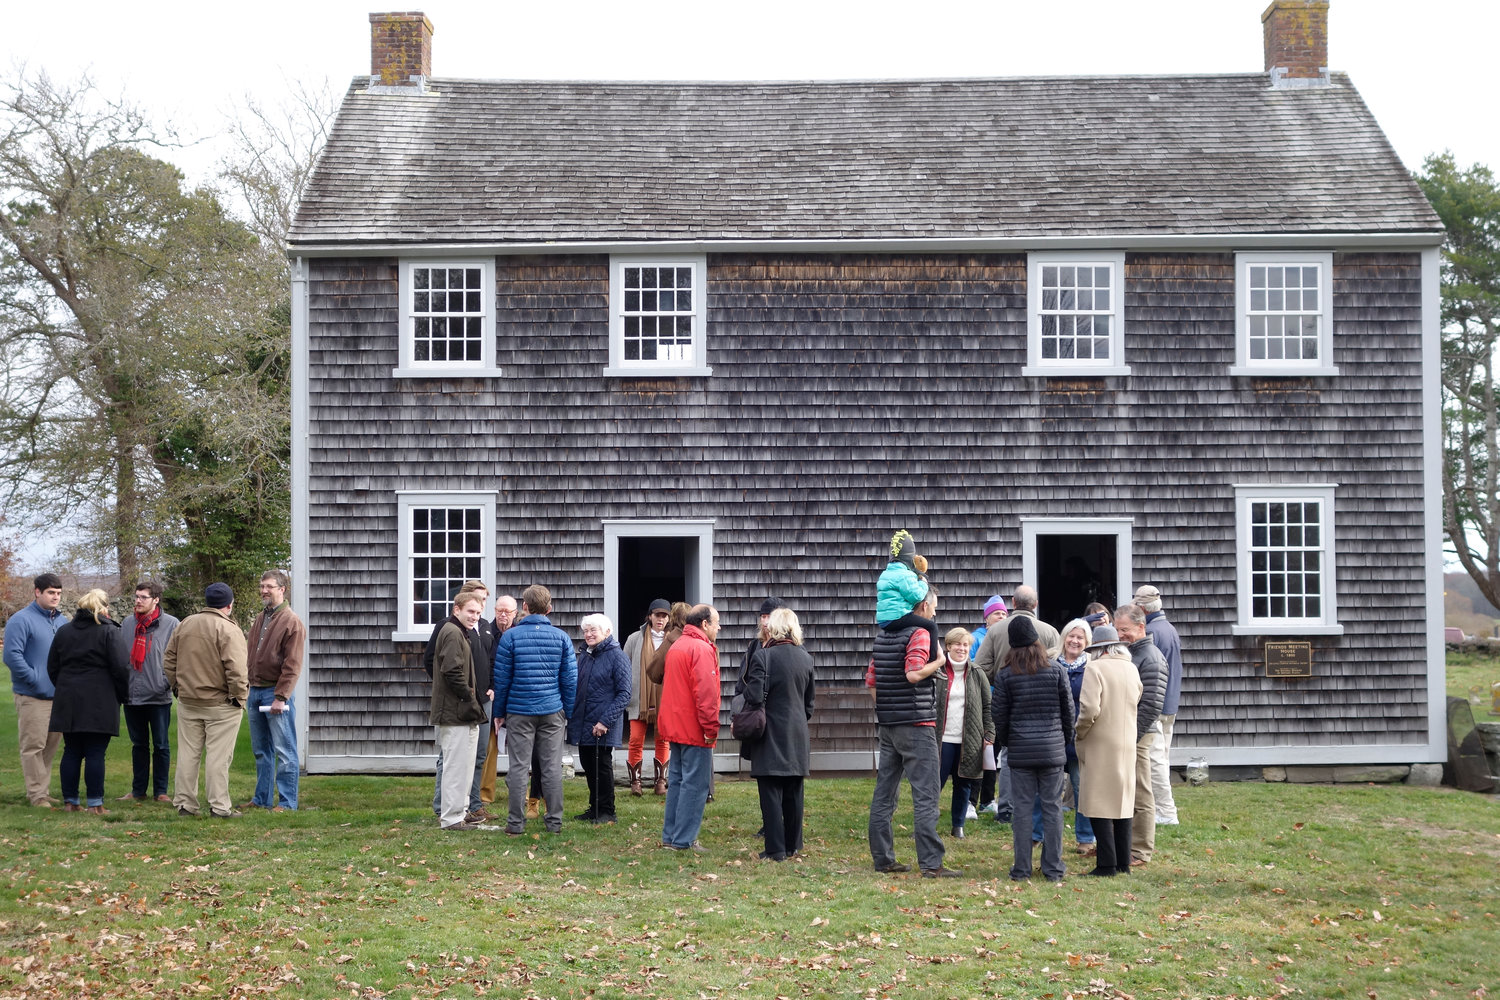 Residents gather at the Friends Meeting House for a previous Thanksgiving service.